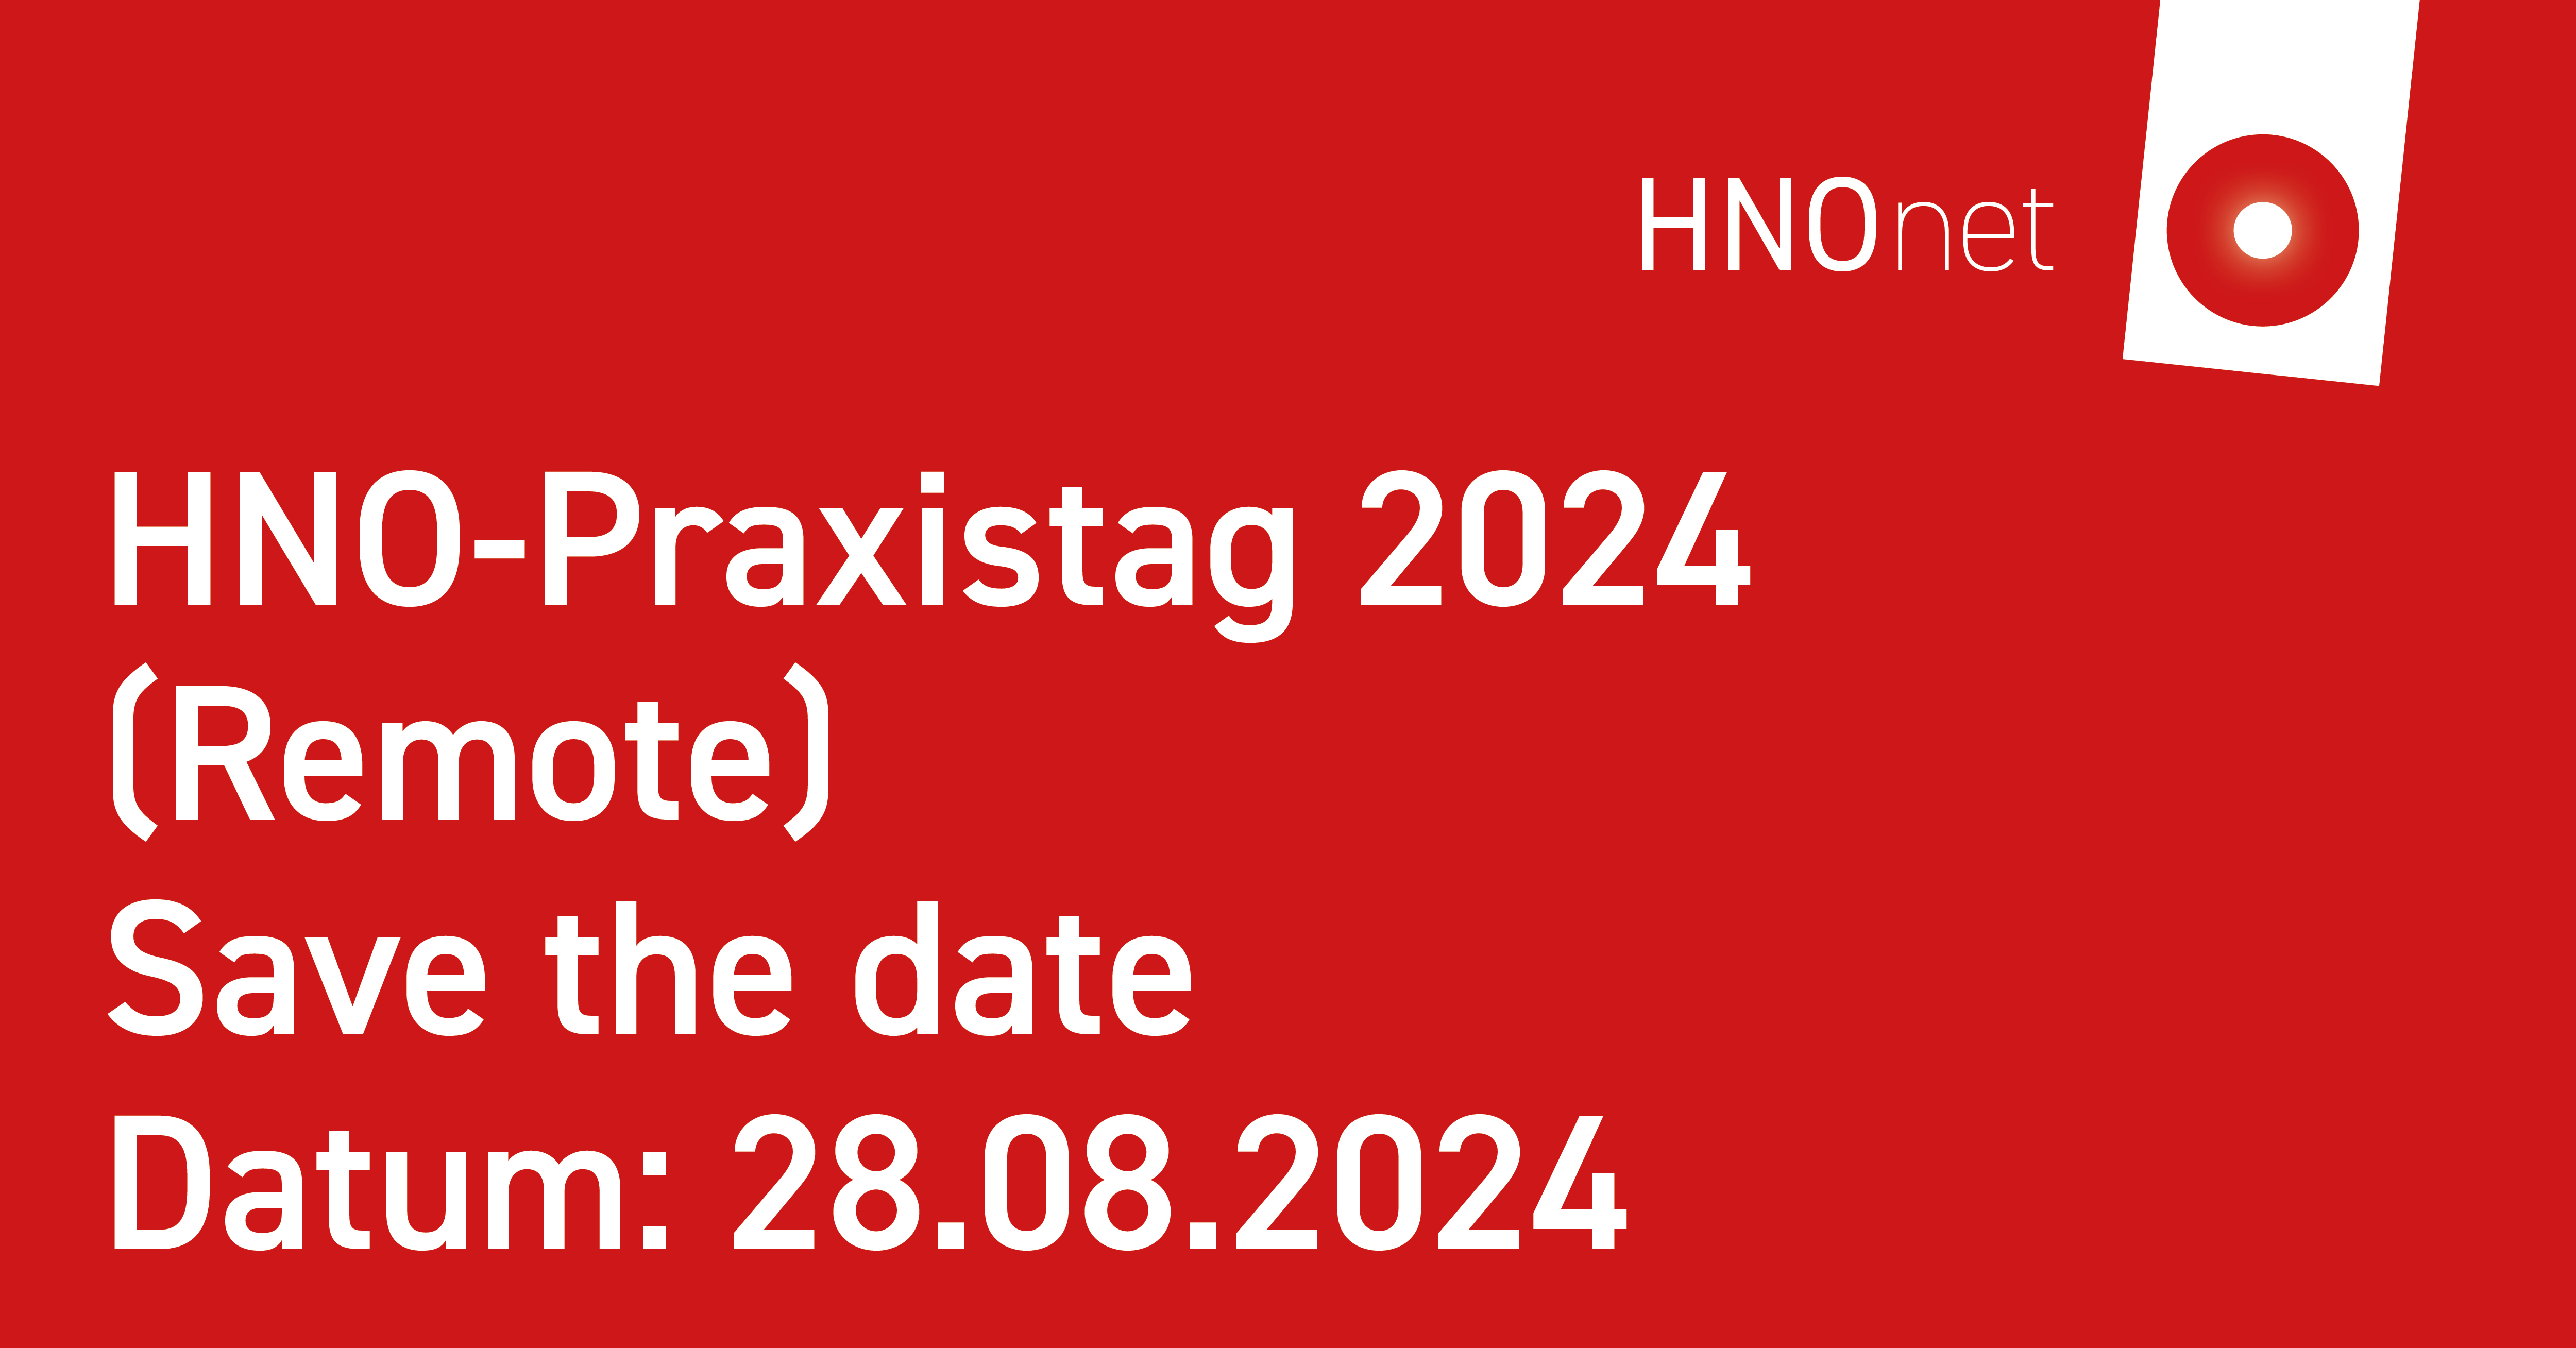 Praxistag2024 Save the date